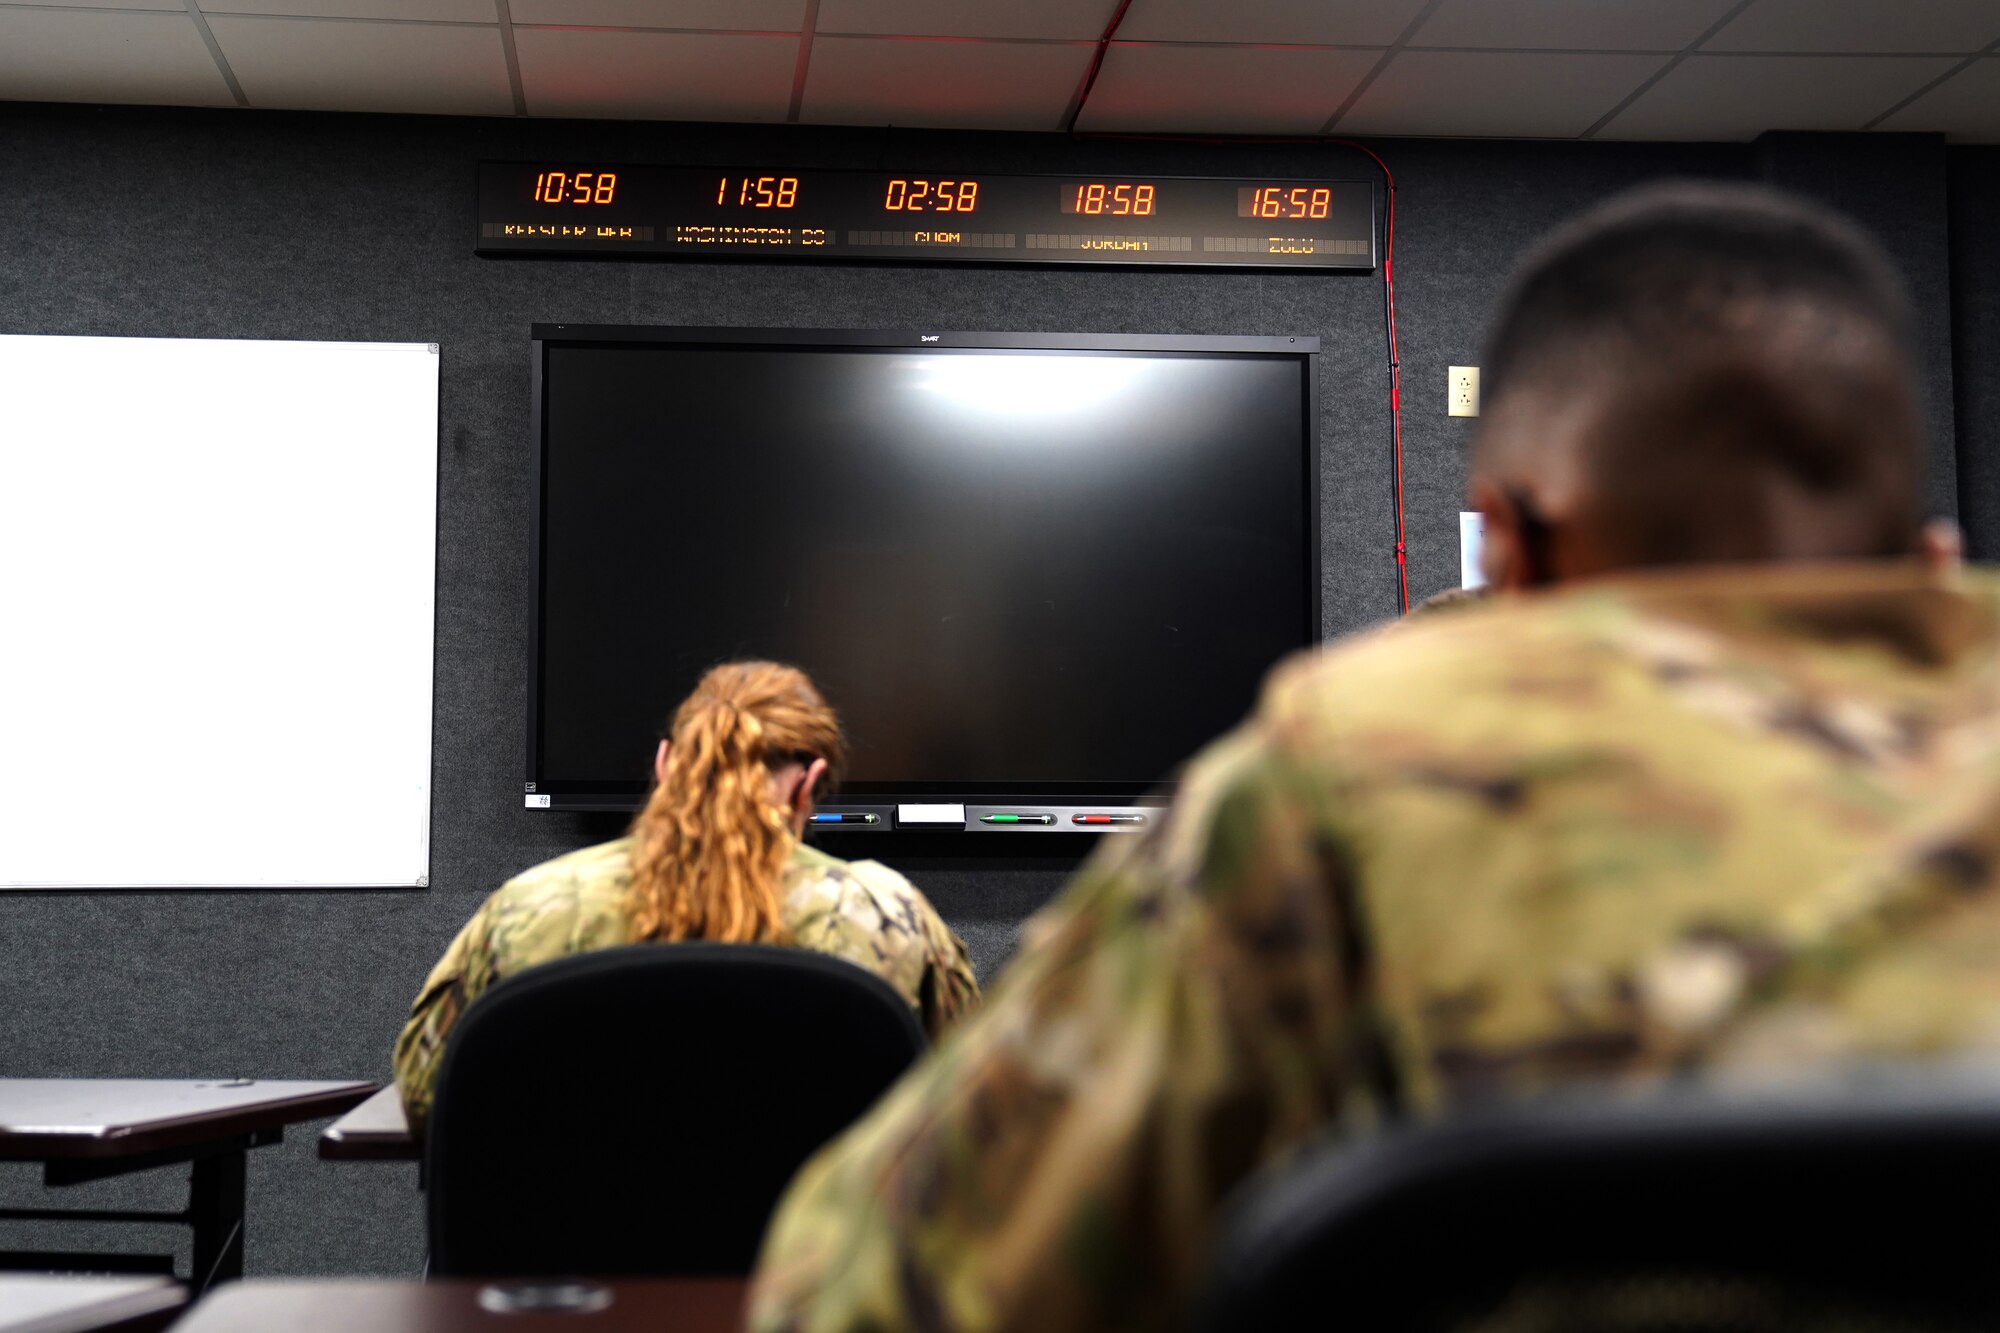 334th Training Squadron students attend a command post operations class inside a classroom dedicated to Master Sgt. Desiree McIntyre, 403rd Wing command and control technician, located in Cody Hall at Keesler Air Force Base, Mississippi, Feb. 25, 2021. McIntyre dedicated 30 years to the command post career field, providing instrumental training techniques and developing the training curriculum. (U.S. Air Force photo by Senior Airman Seth Haddix)